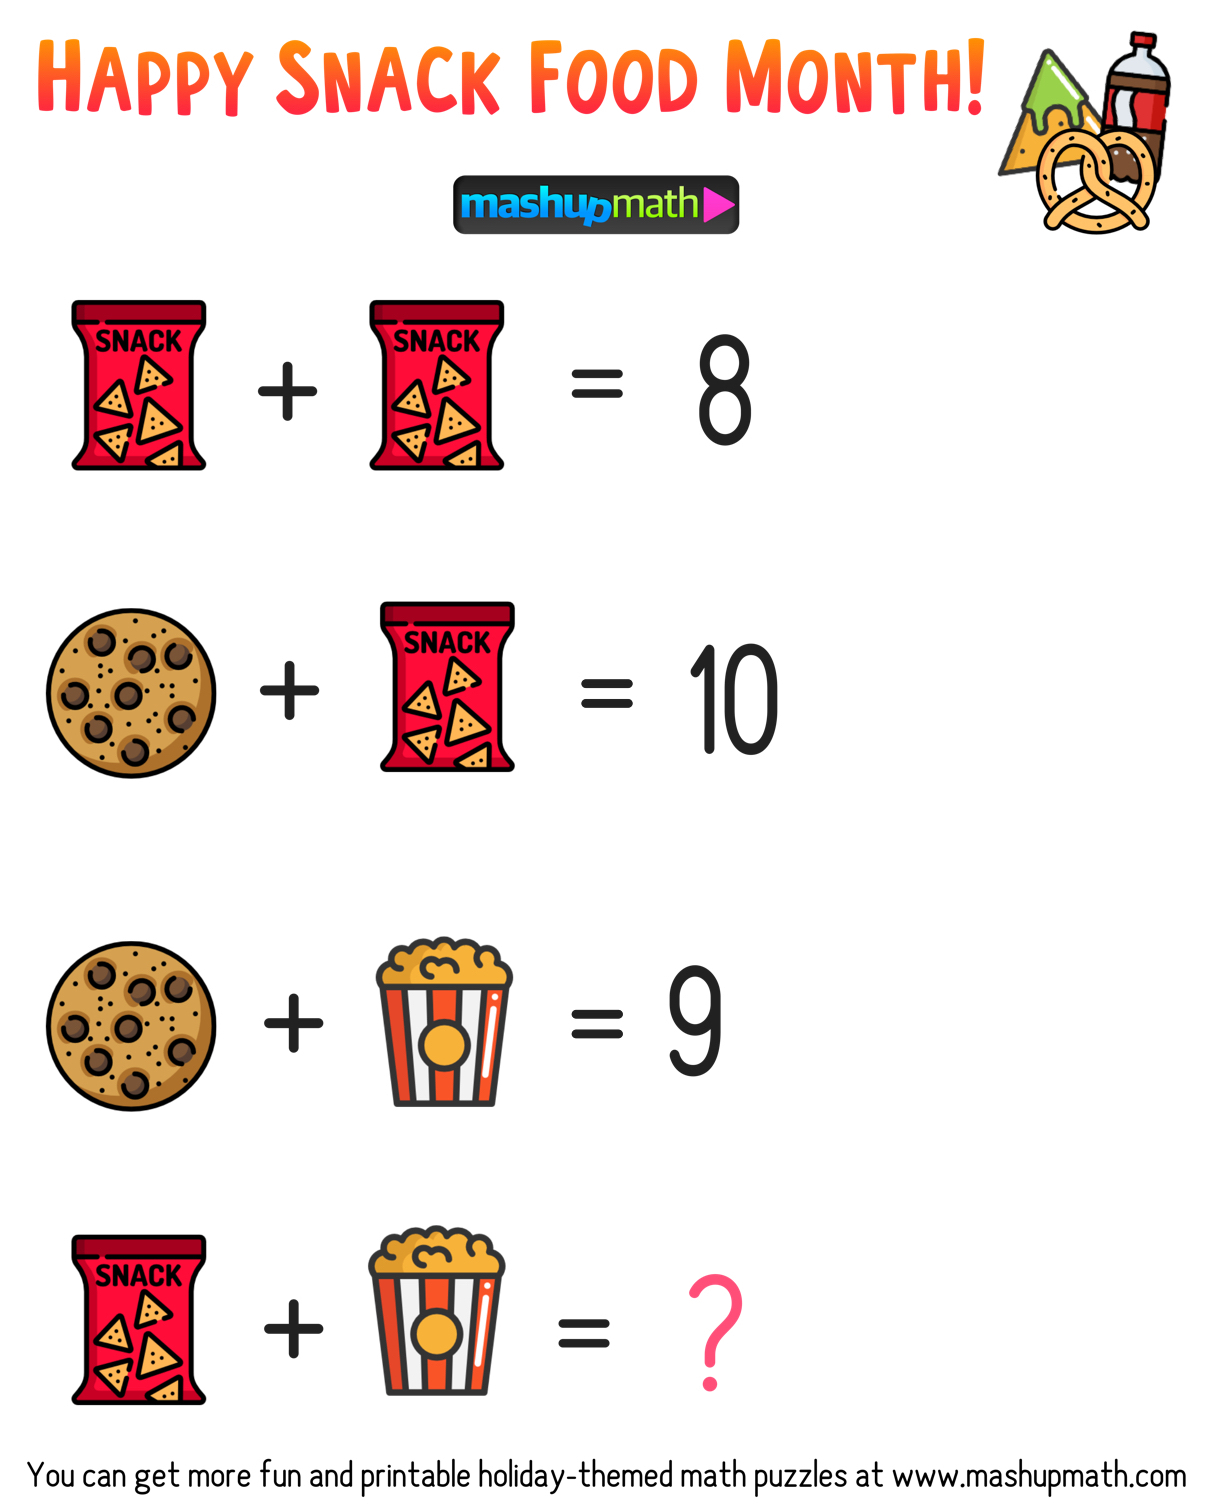 free-math-brain-teaser-puzzles-for-kids-in-grades-1-6-to-celebrate